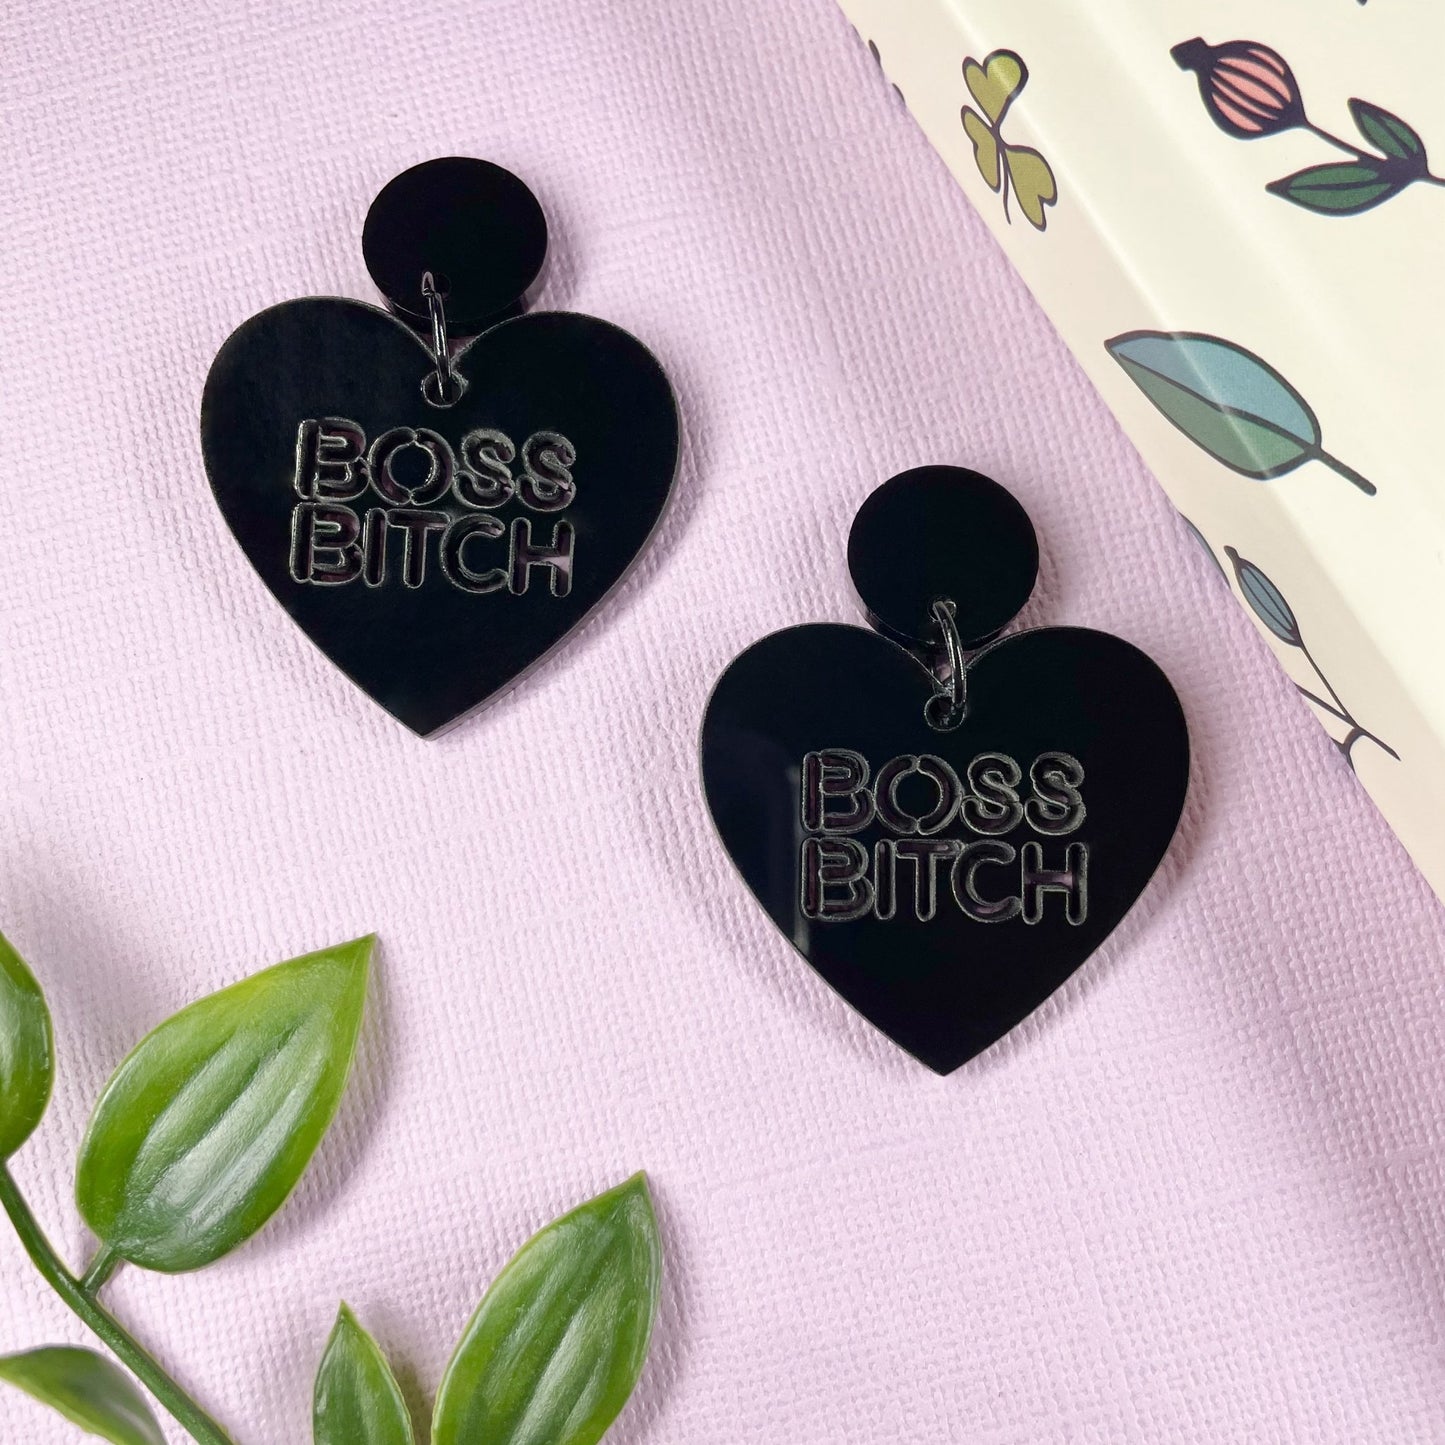 Boss B-tch Candy Heart Earrings (6 colours available) - Lost Minds Clothing